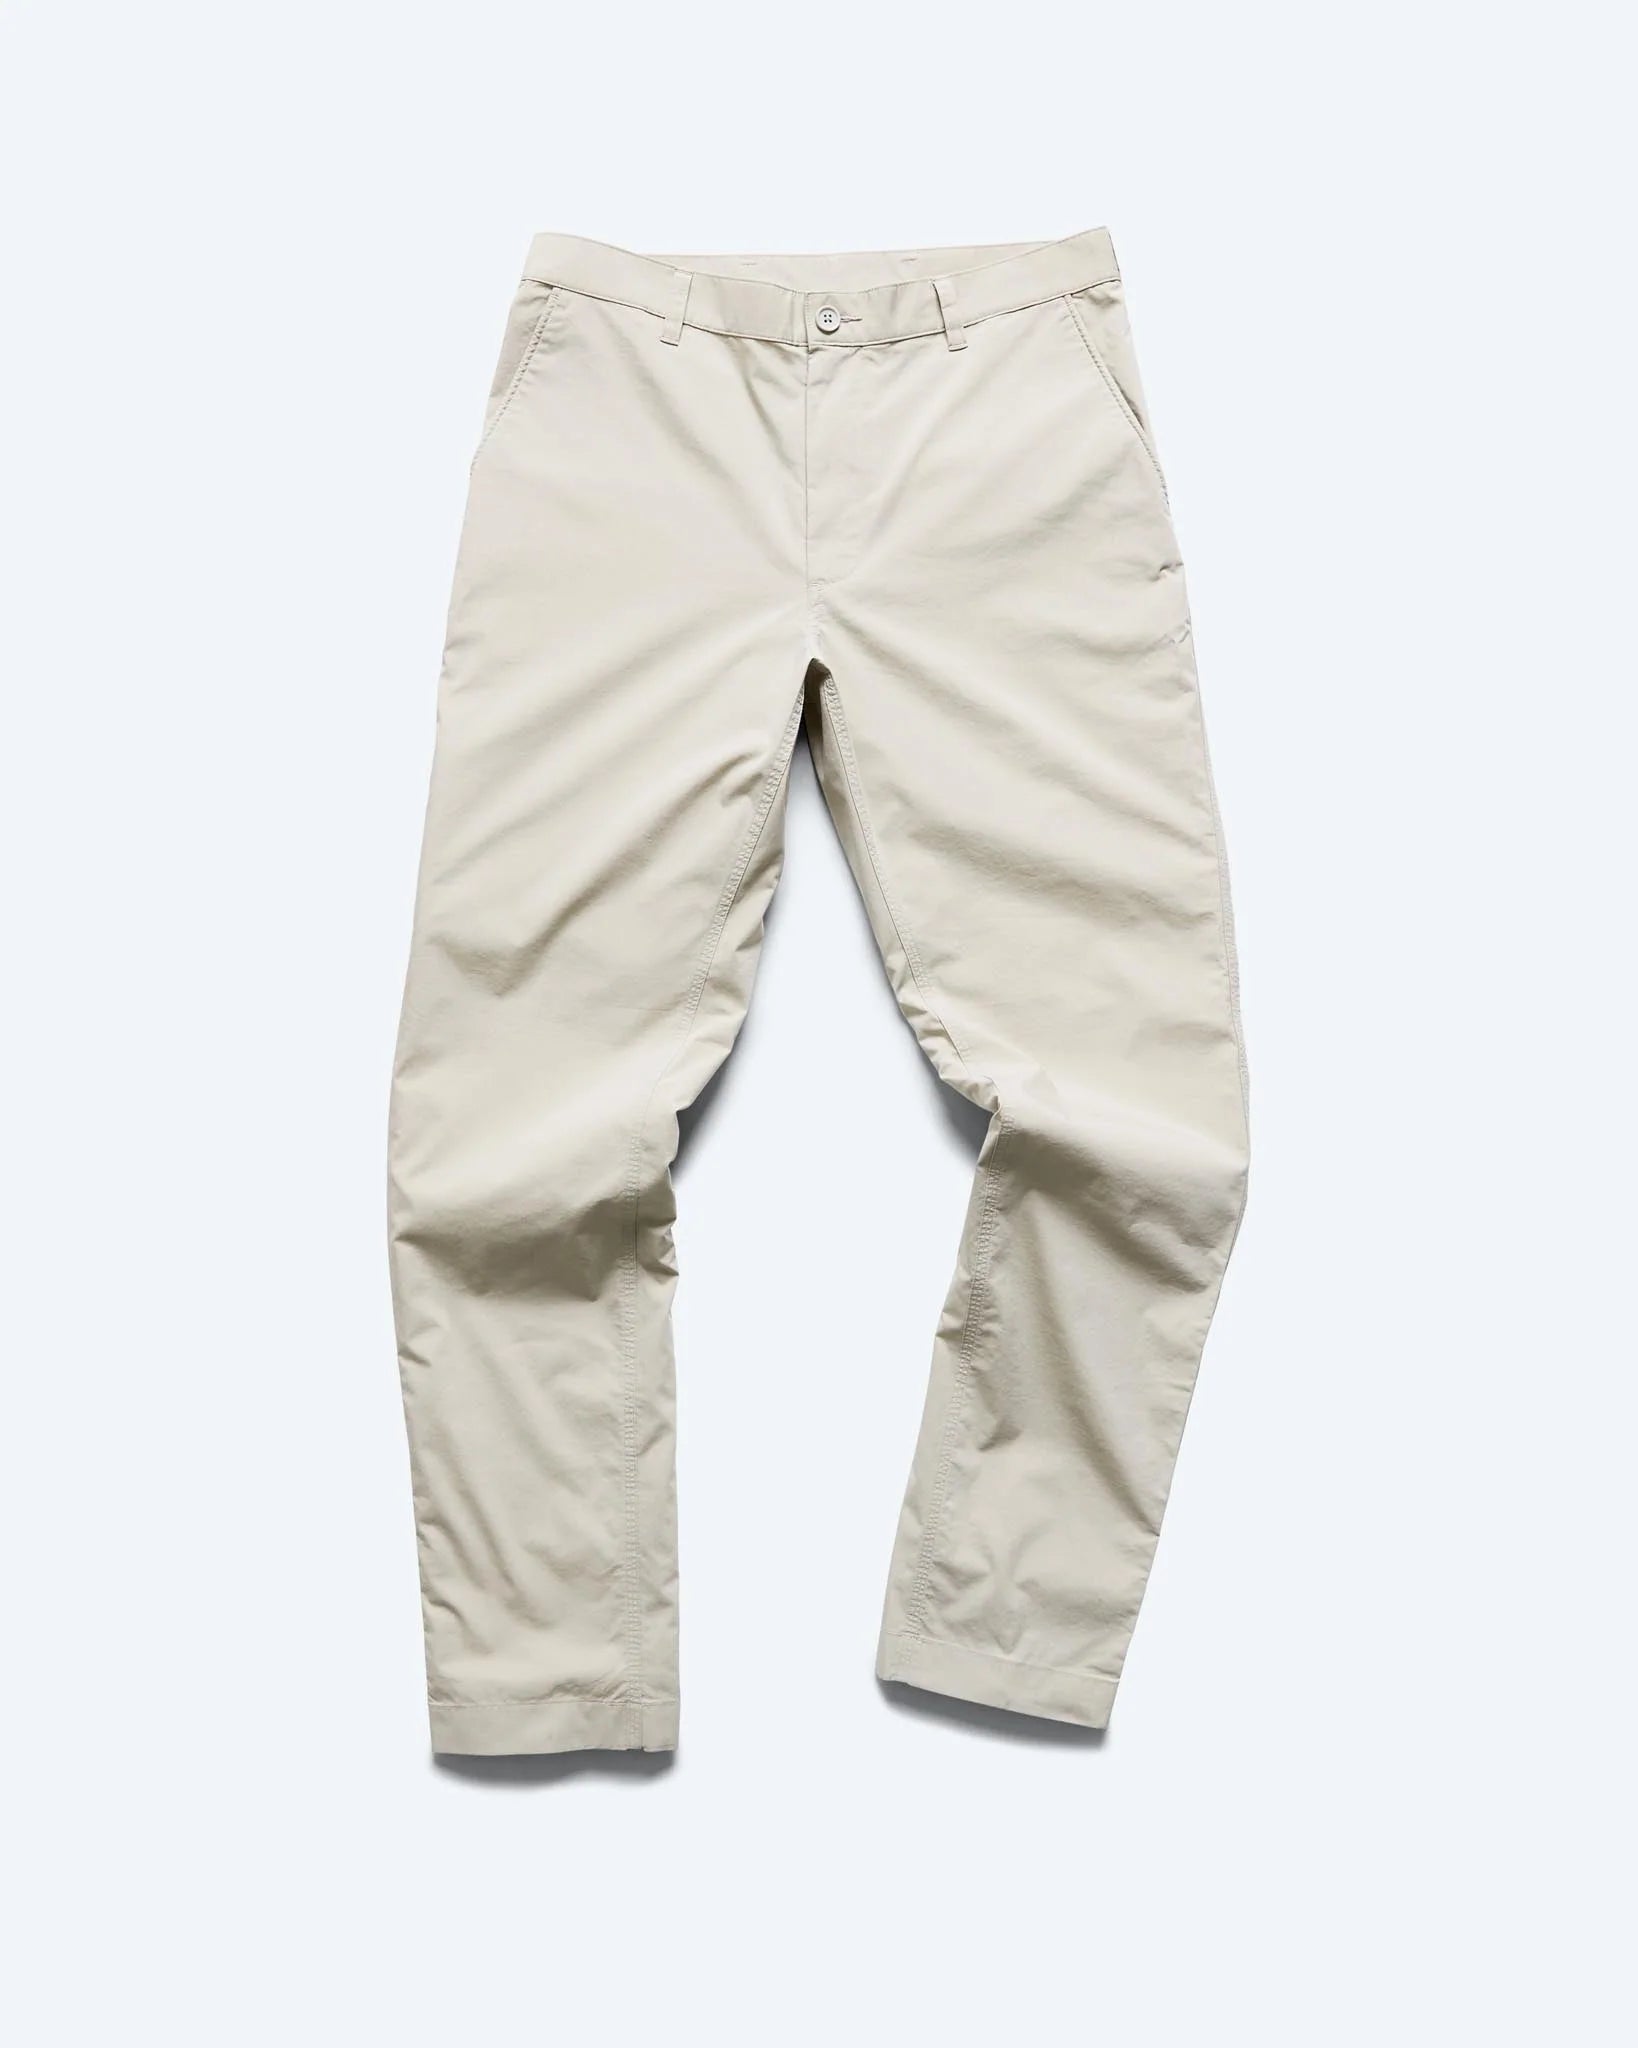 Reigning Champ Solotex Cotton Freshman Pant in Dove